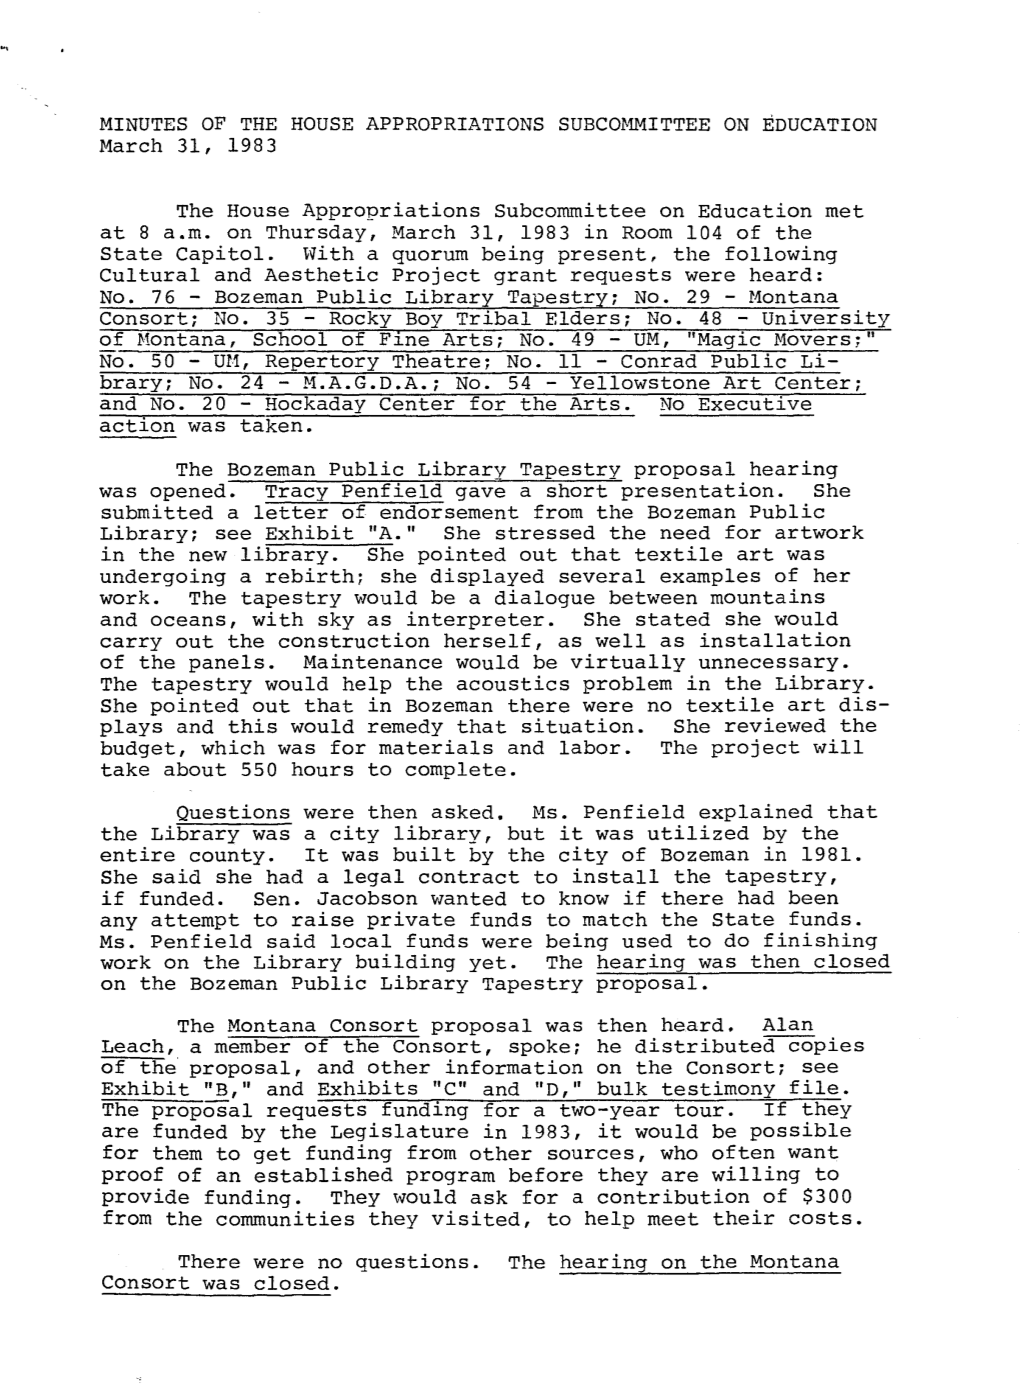 ITTEE on EDUCATION March 31, 1983 the House Appropriations